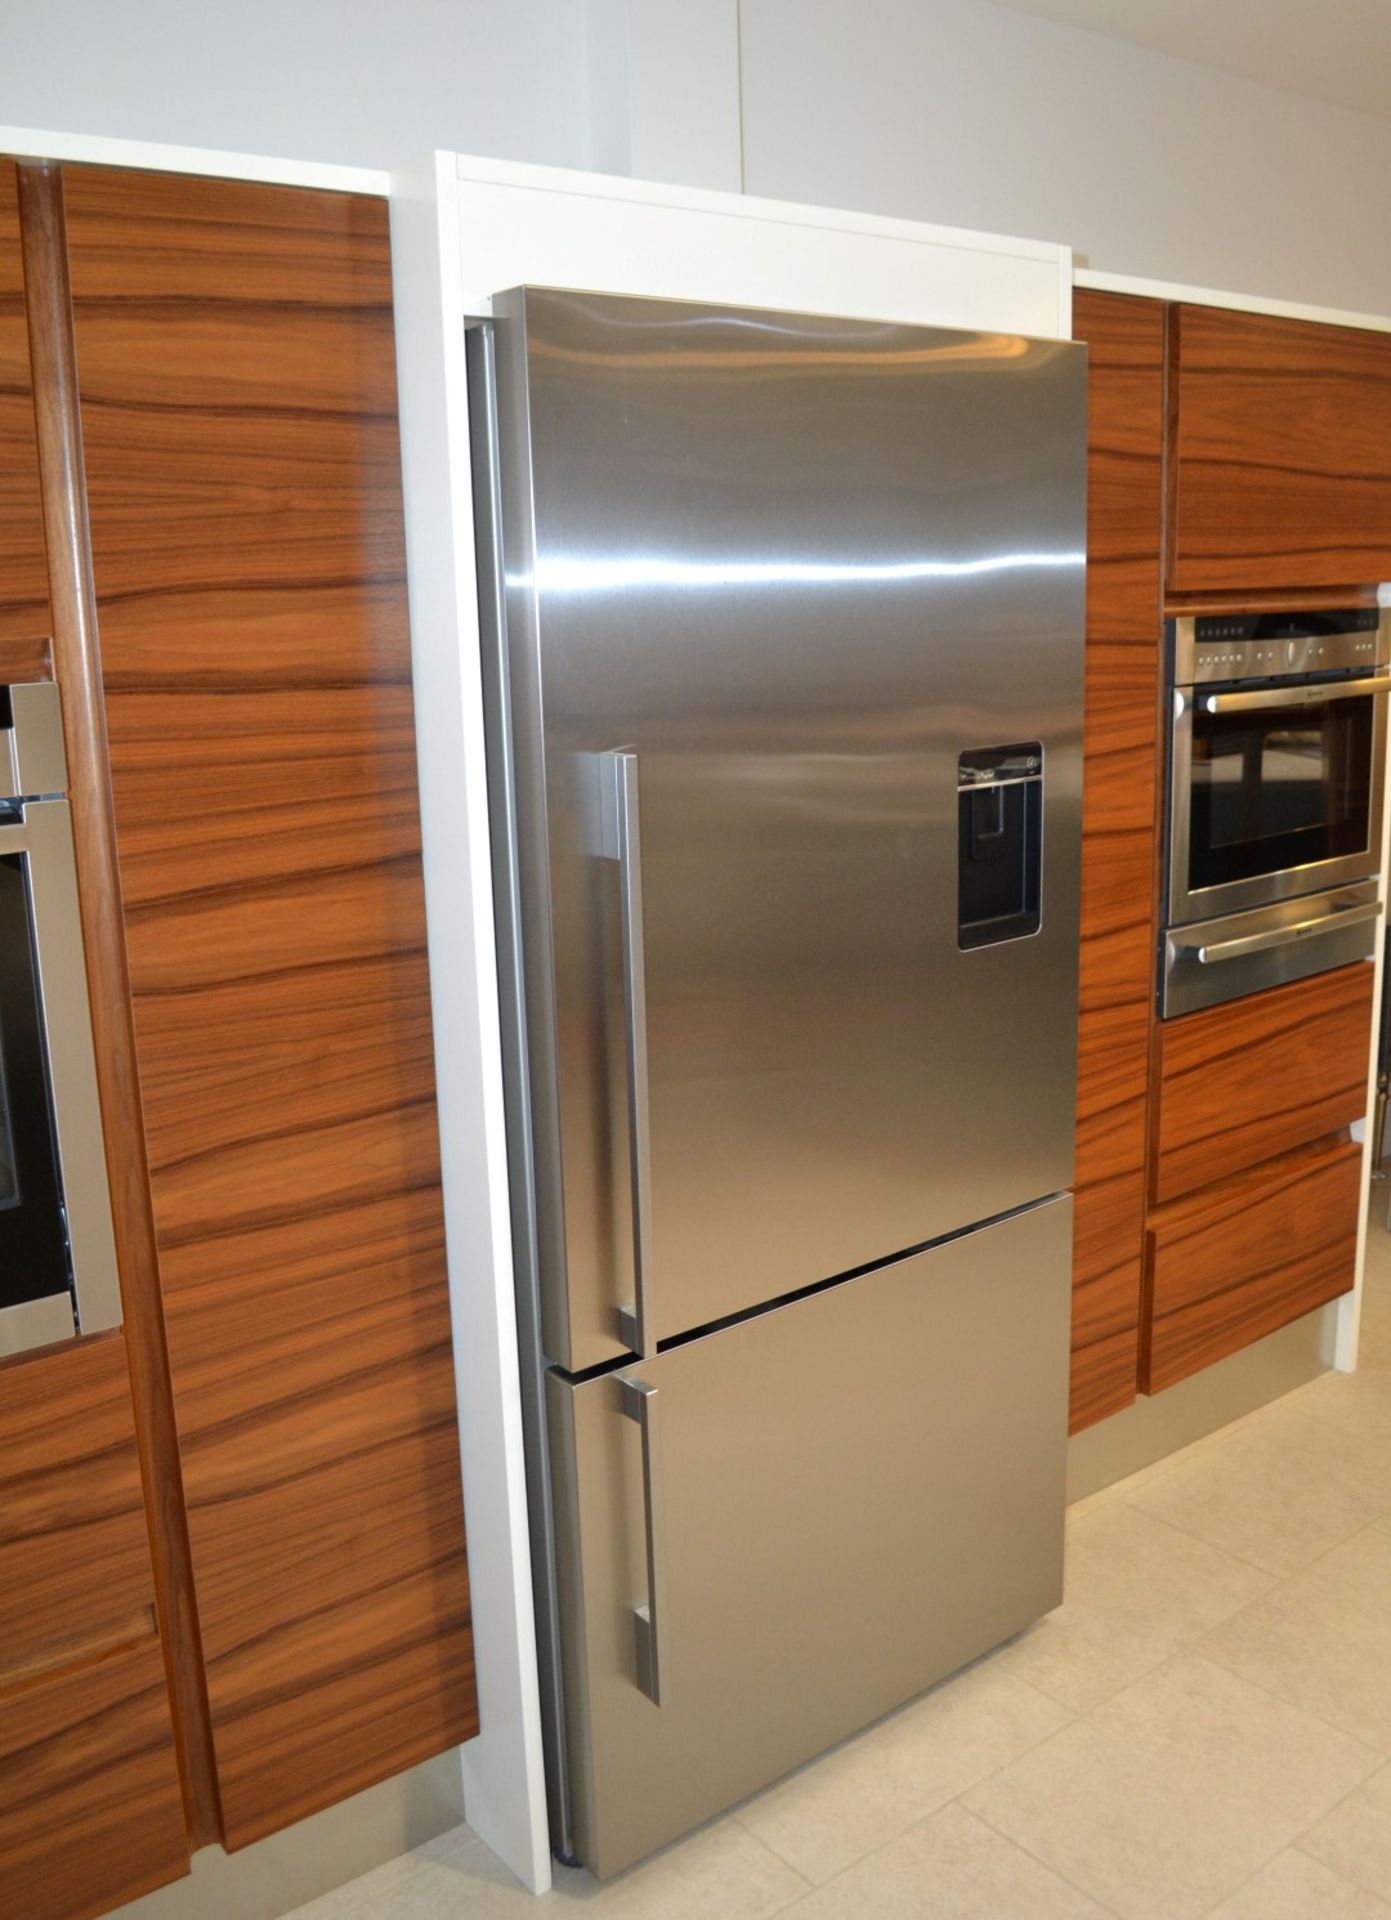 1 x Fisher & Paykel Stainless Steel 790mm 469 Litre Fridge Freezer from Showroom Display Kitchen - - Image 2 of 17